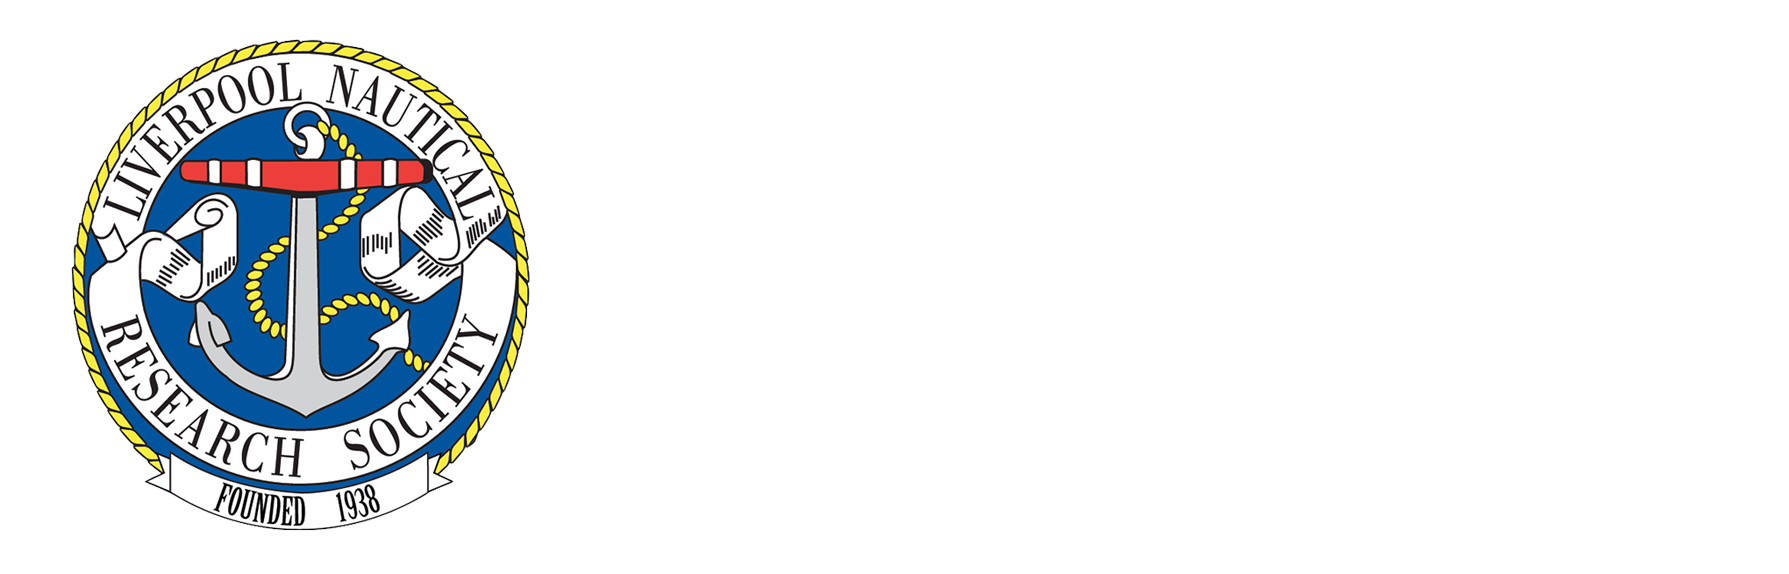 Liverpool Nautical Research Society